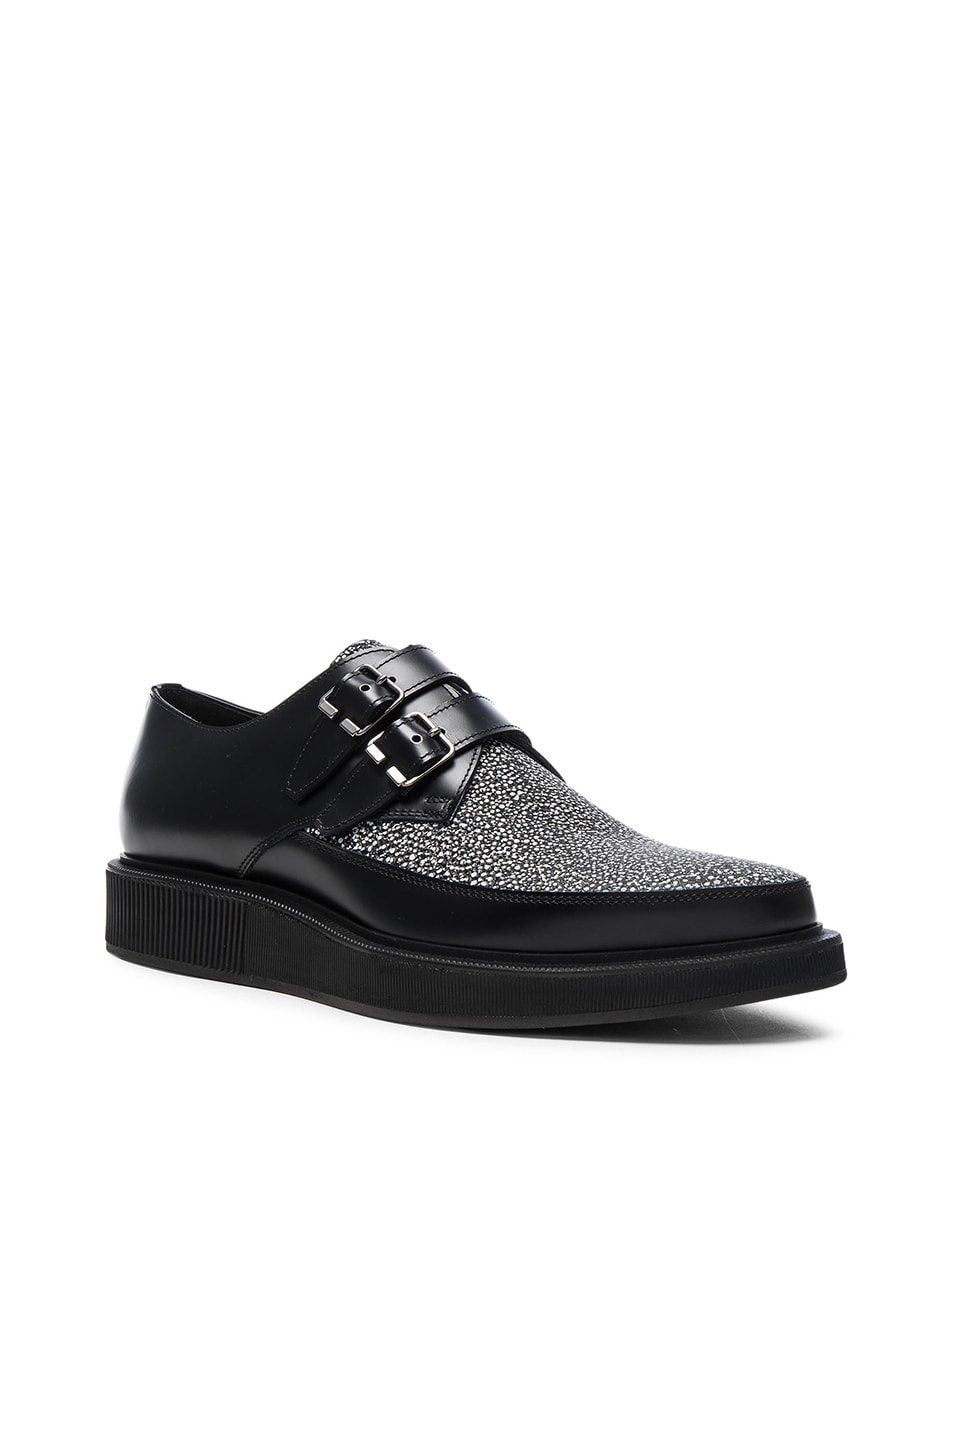 Image 1 of Lanvin Contrast Leather Monk Shoes in Black & White